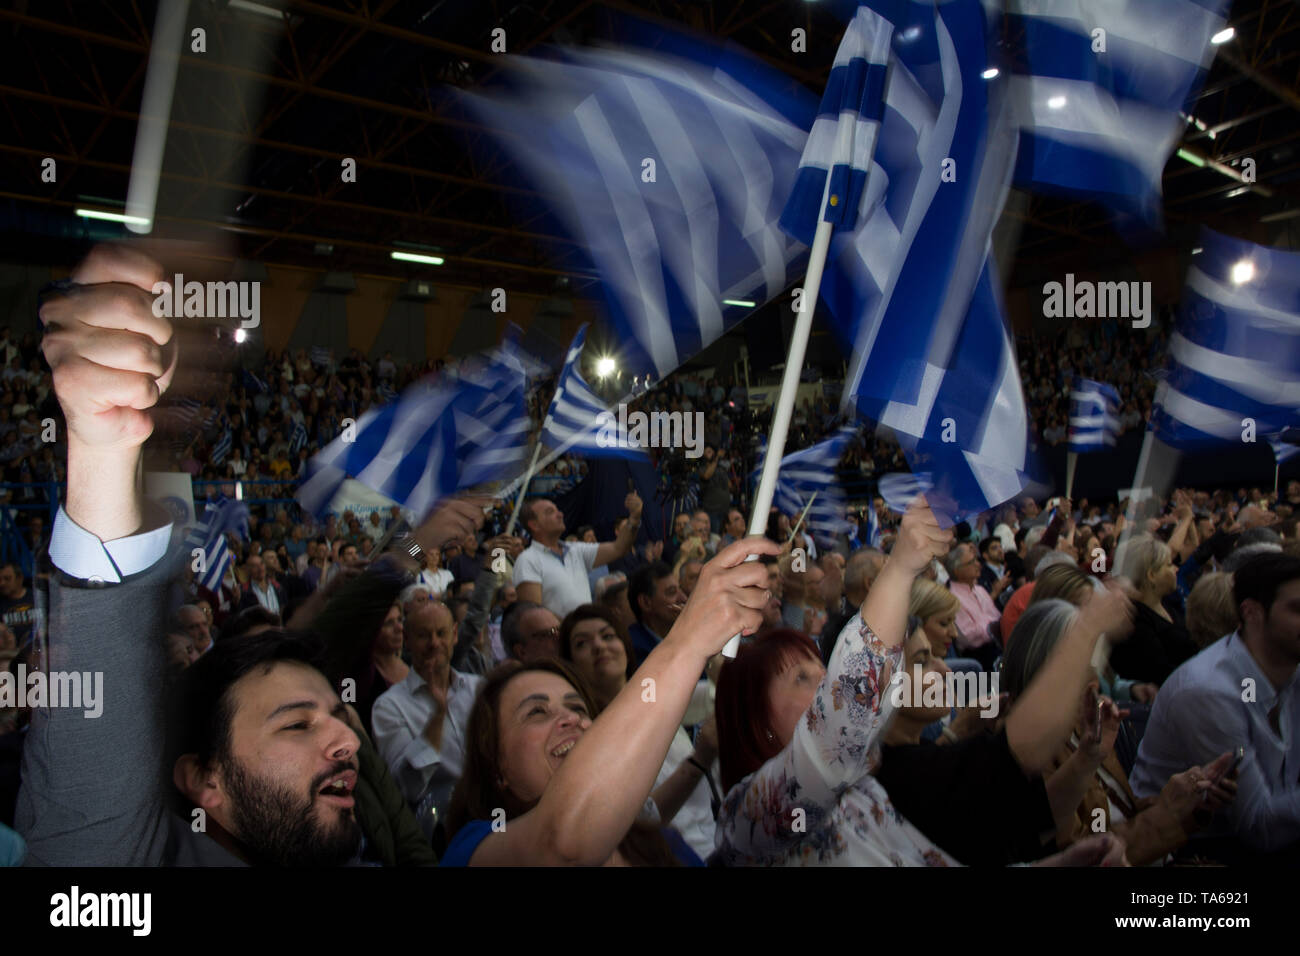 Athens, Greece. 22nd May 2019. Conservative New Democracy party supporters wave flags and shout slogans. New Democracy fans attended the party’s main pre-election rally in Athens as Greeks will vote for European Parliament and municipalities on May 26th.© Nikolas Georgiou / Alamy Live News Stock Photo